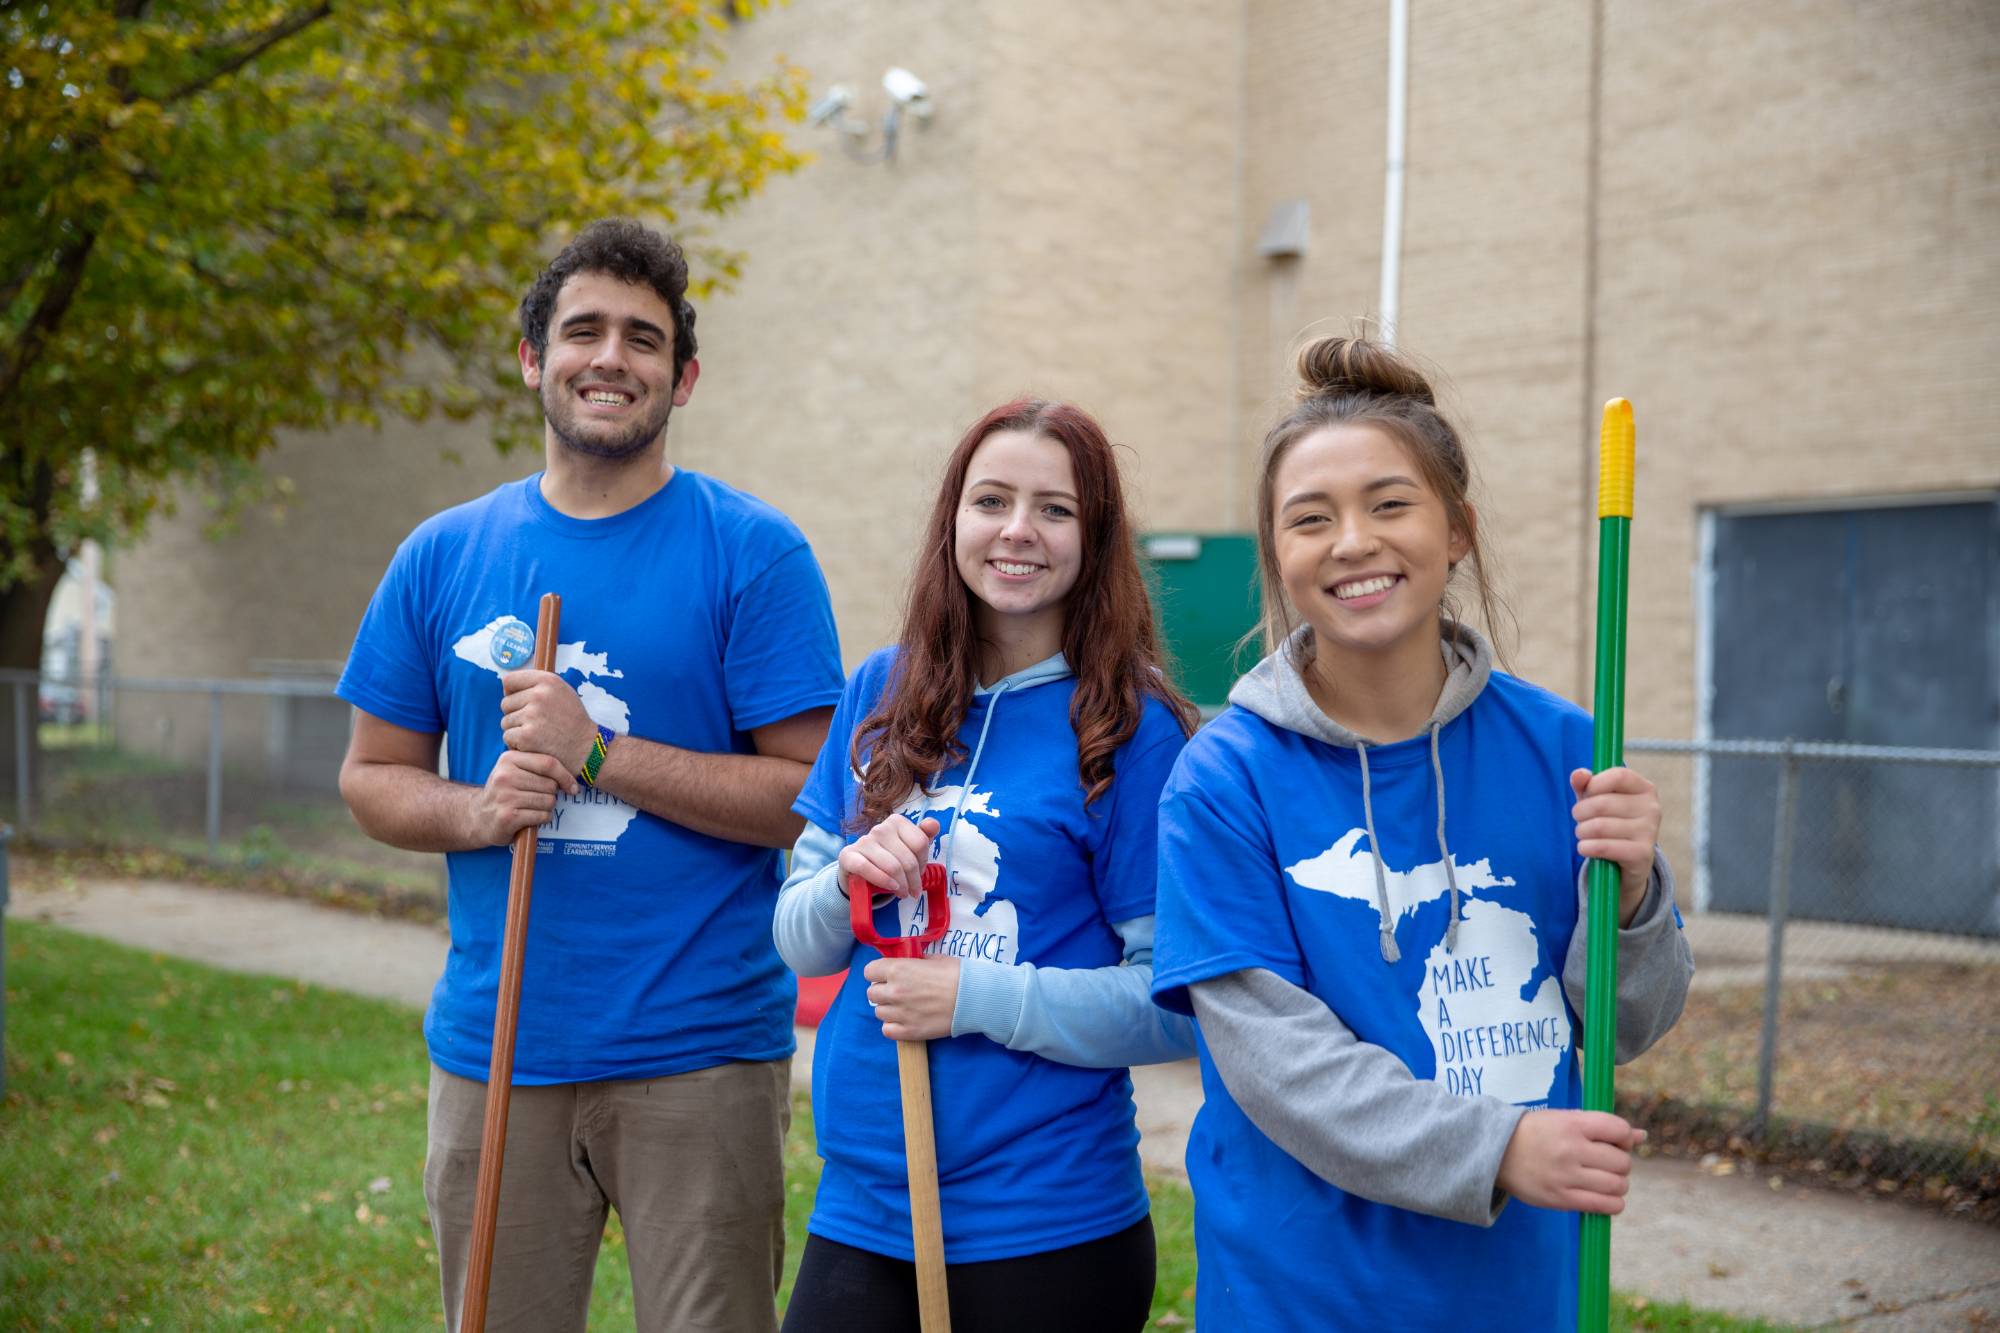 Three students holding gardening tools on Make a Difference Day